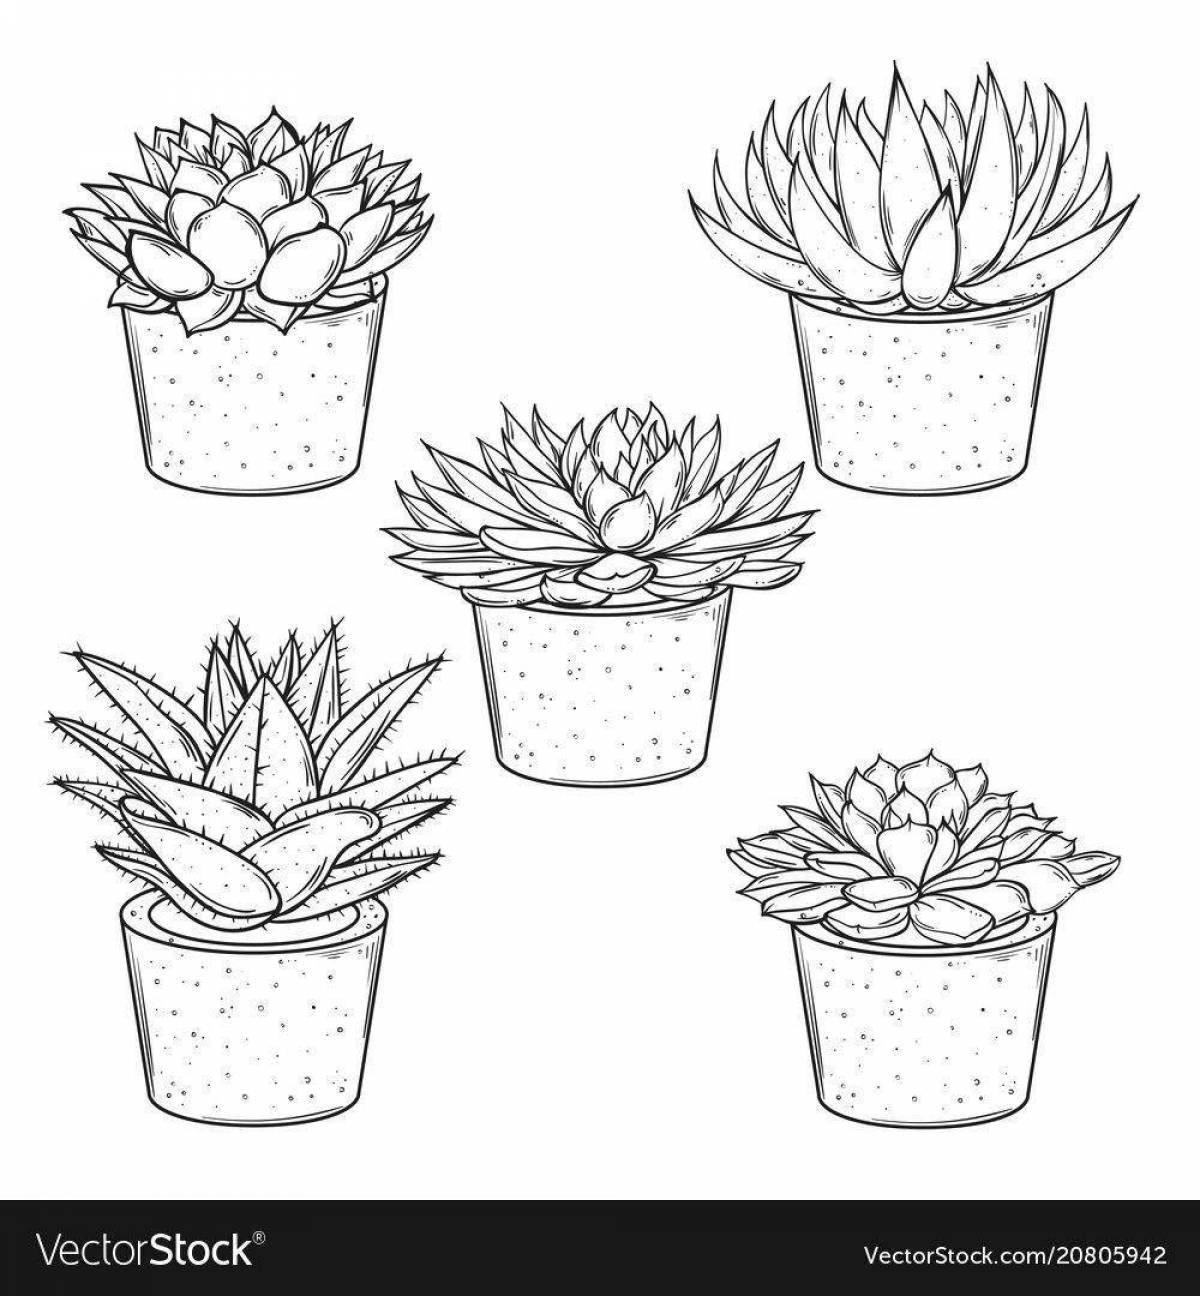 Adorable houseplant coloring pages for preschoolers